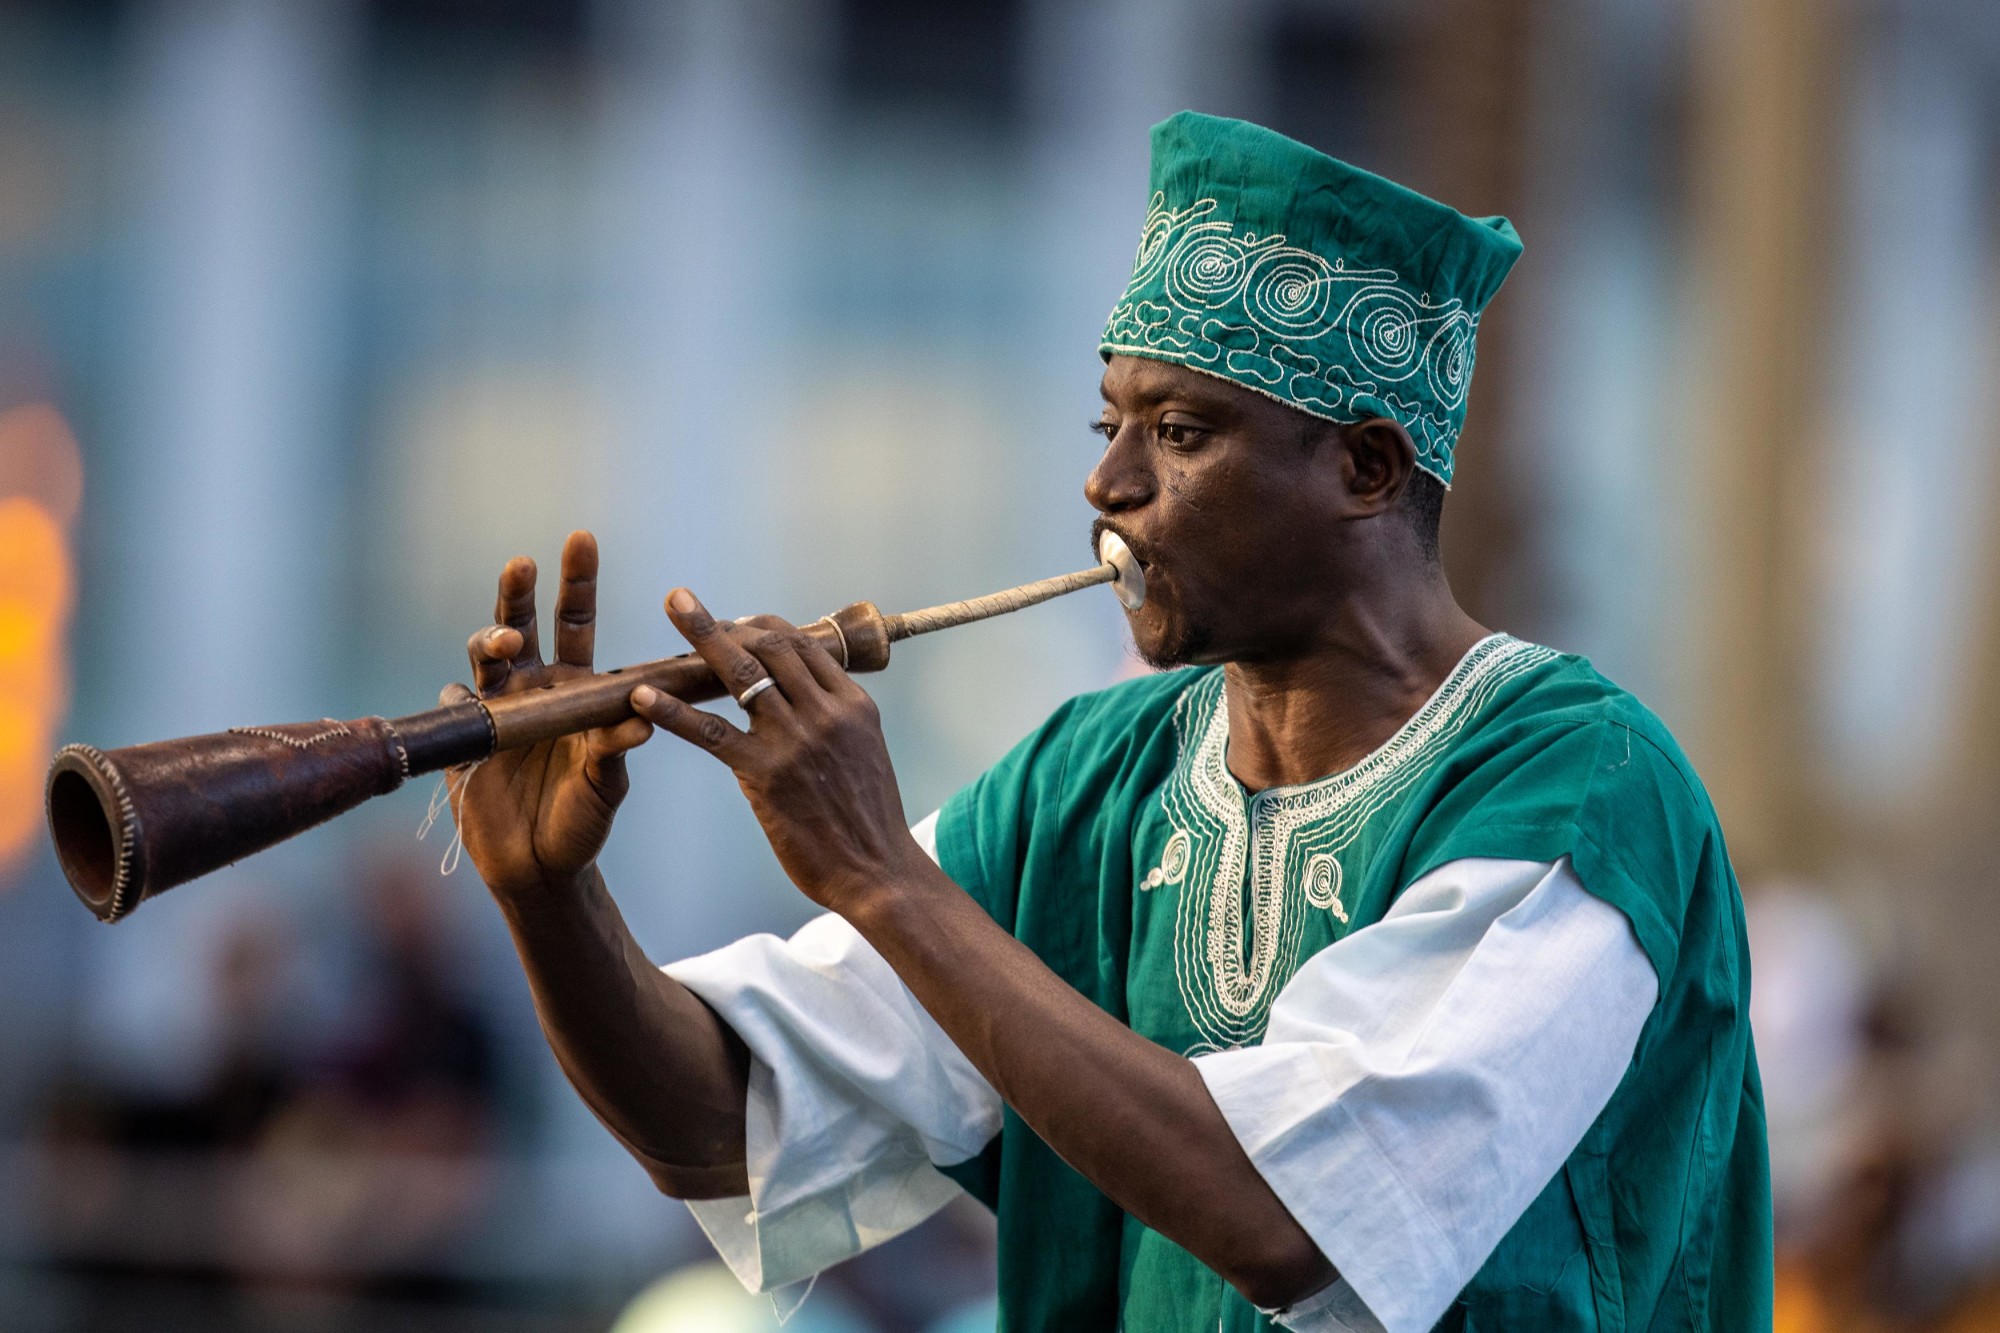 A cultural performer during the Nigeria National Day Ceremony at Al Wasl m16286